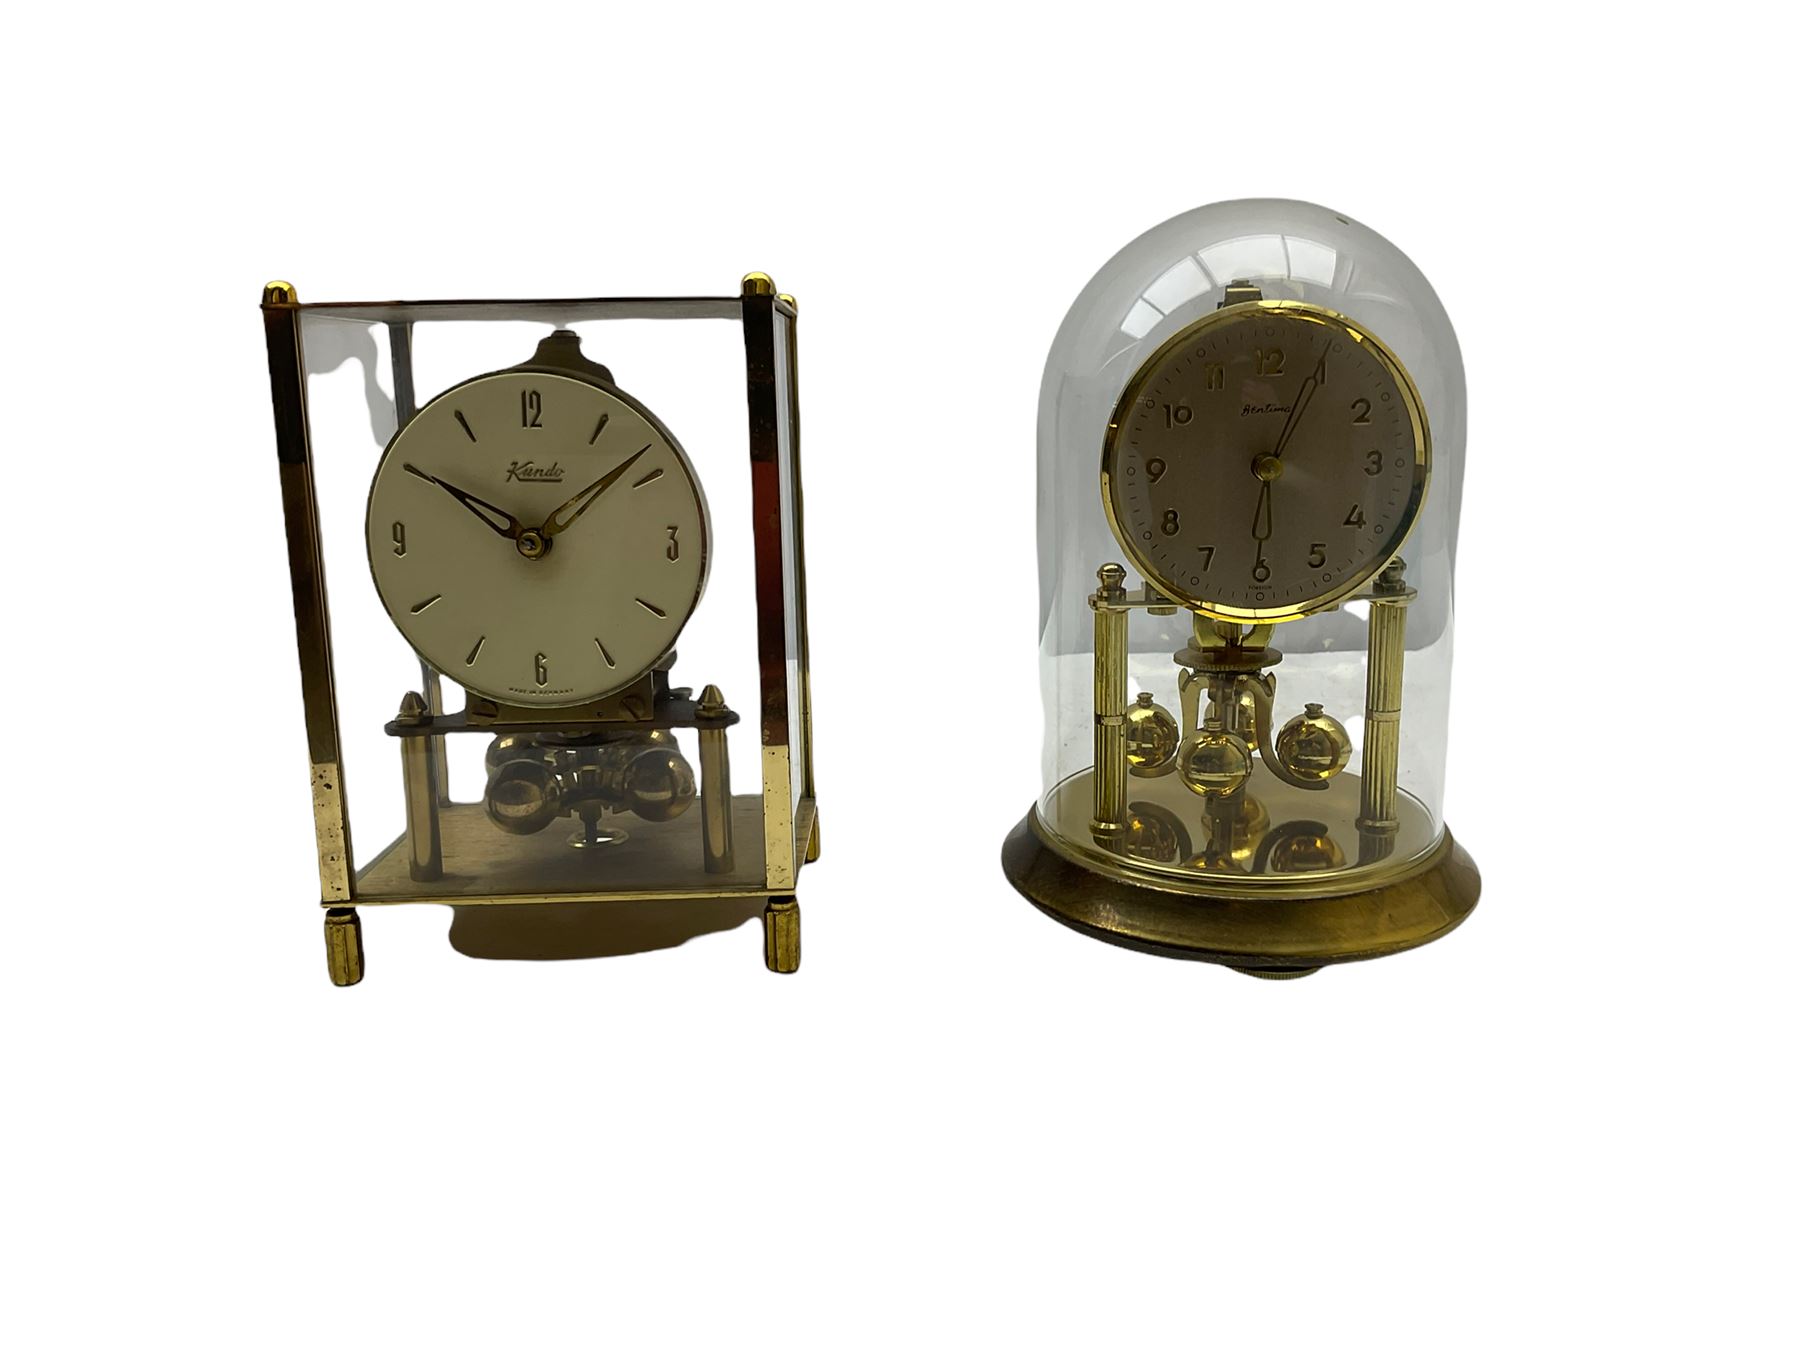 A 20th century English Torsion clock marketed by Bentime Ltd